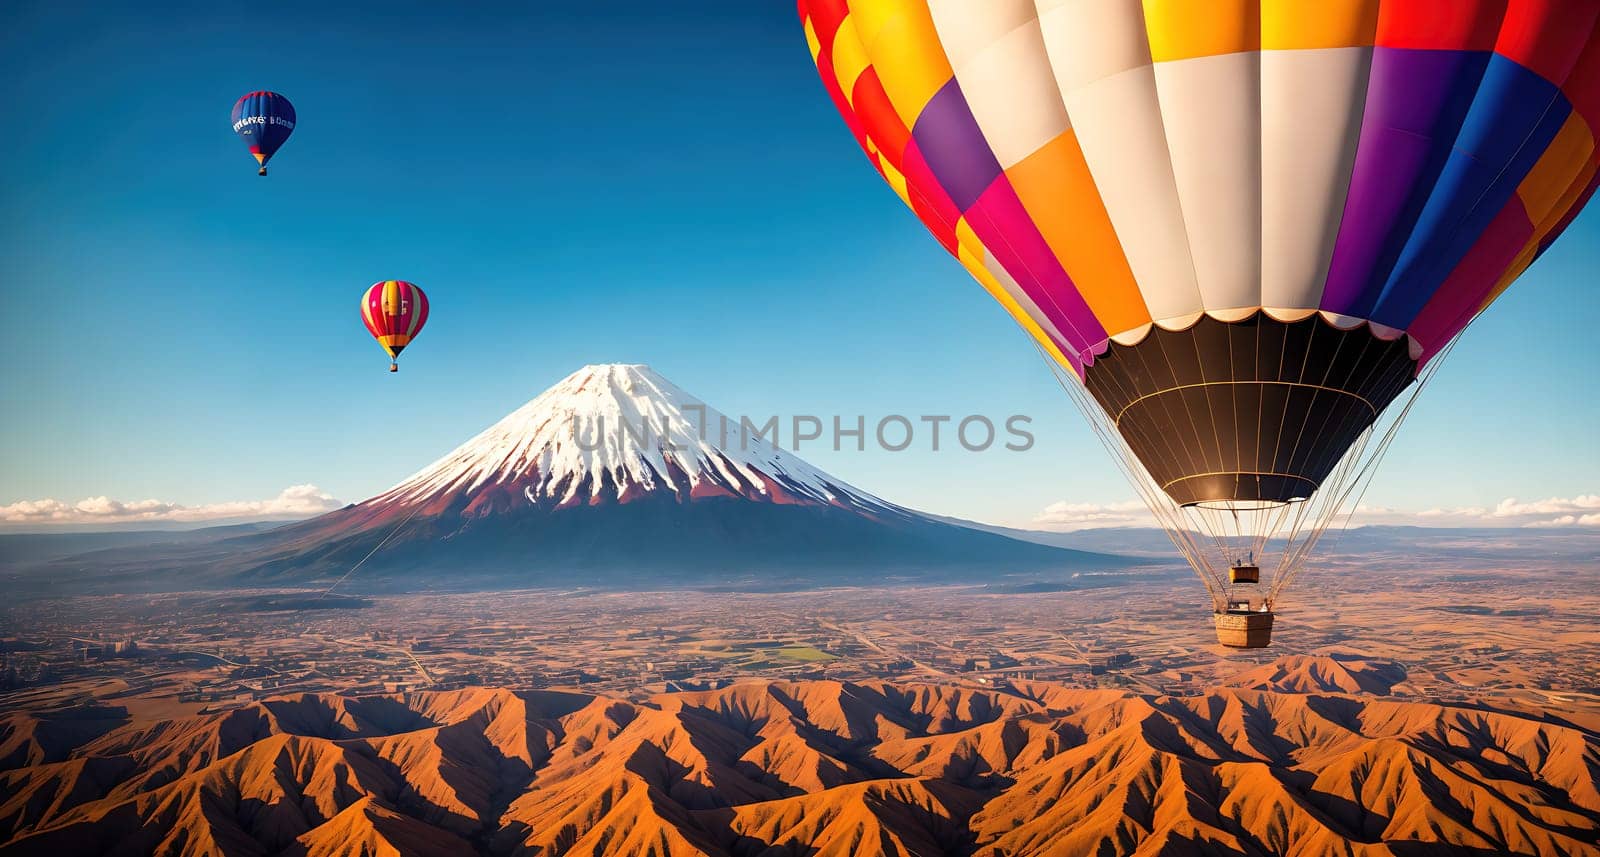 The image shows a group of hot air balloons flying over a mountain range with a volcano in the background.